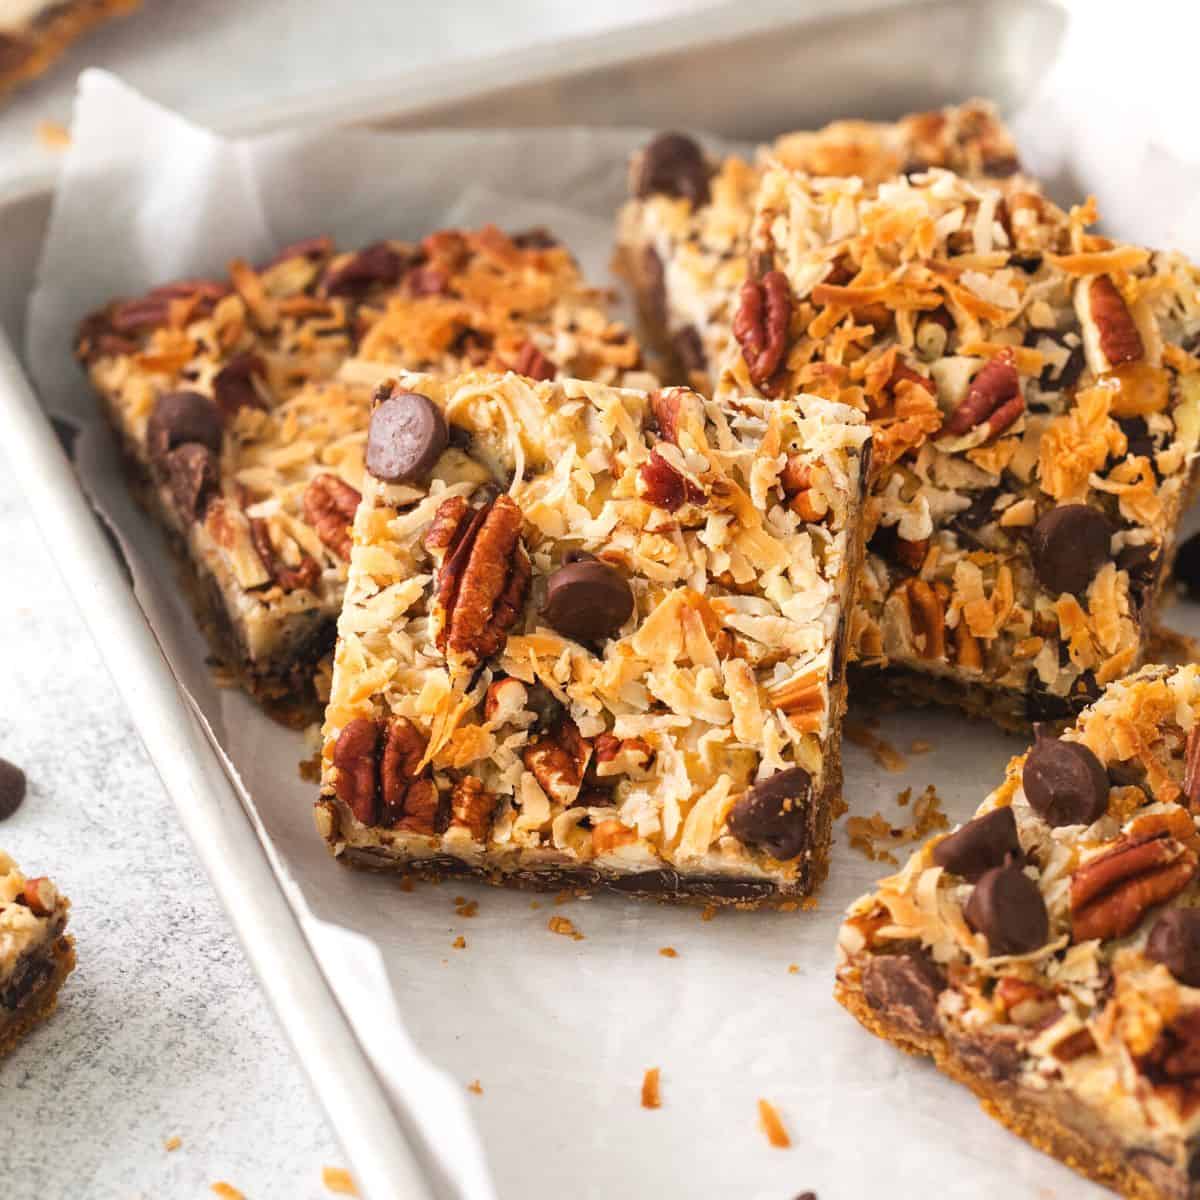 Sugar Free Magic Cookie Bars, a simple and delicious layered dessert or snack recipe made with chocolate and pecans with no added sugar.